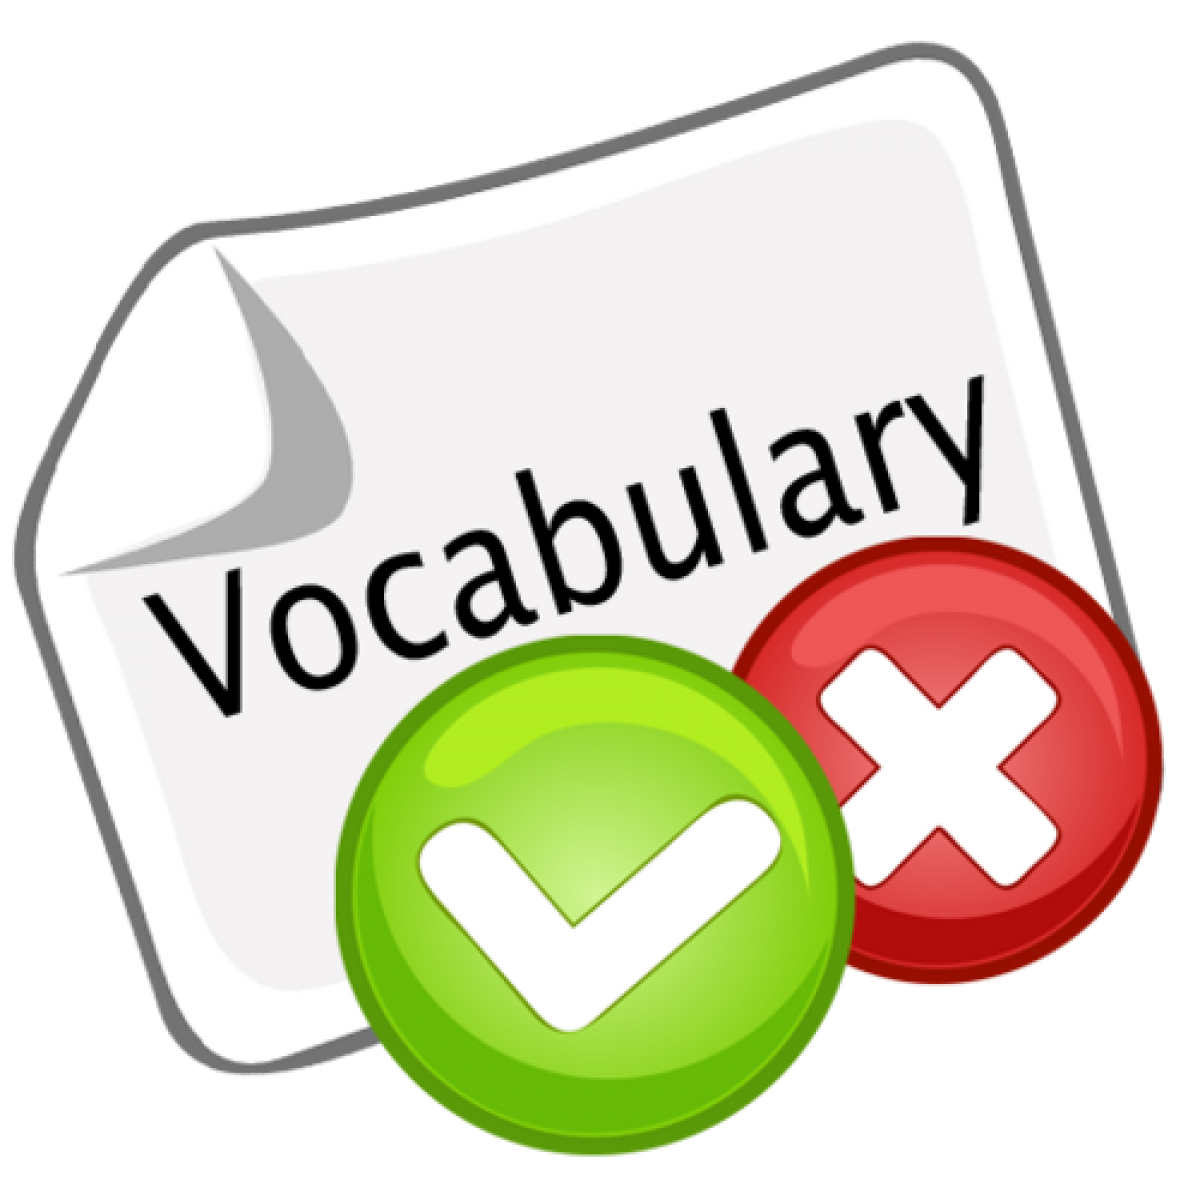 Dictionary clipart vocabulary pictures on Cliparts Pub 2020! ð